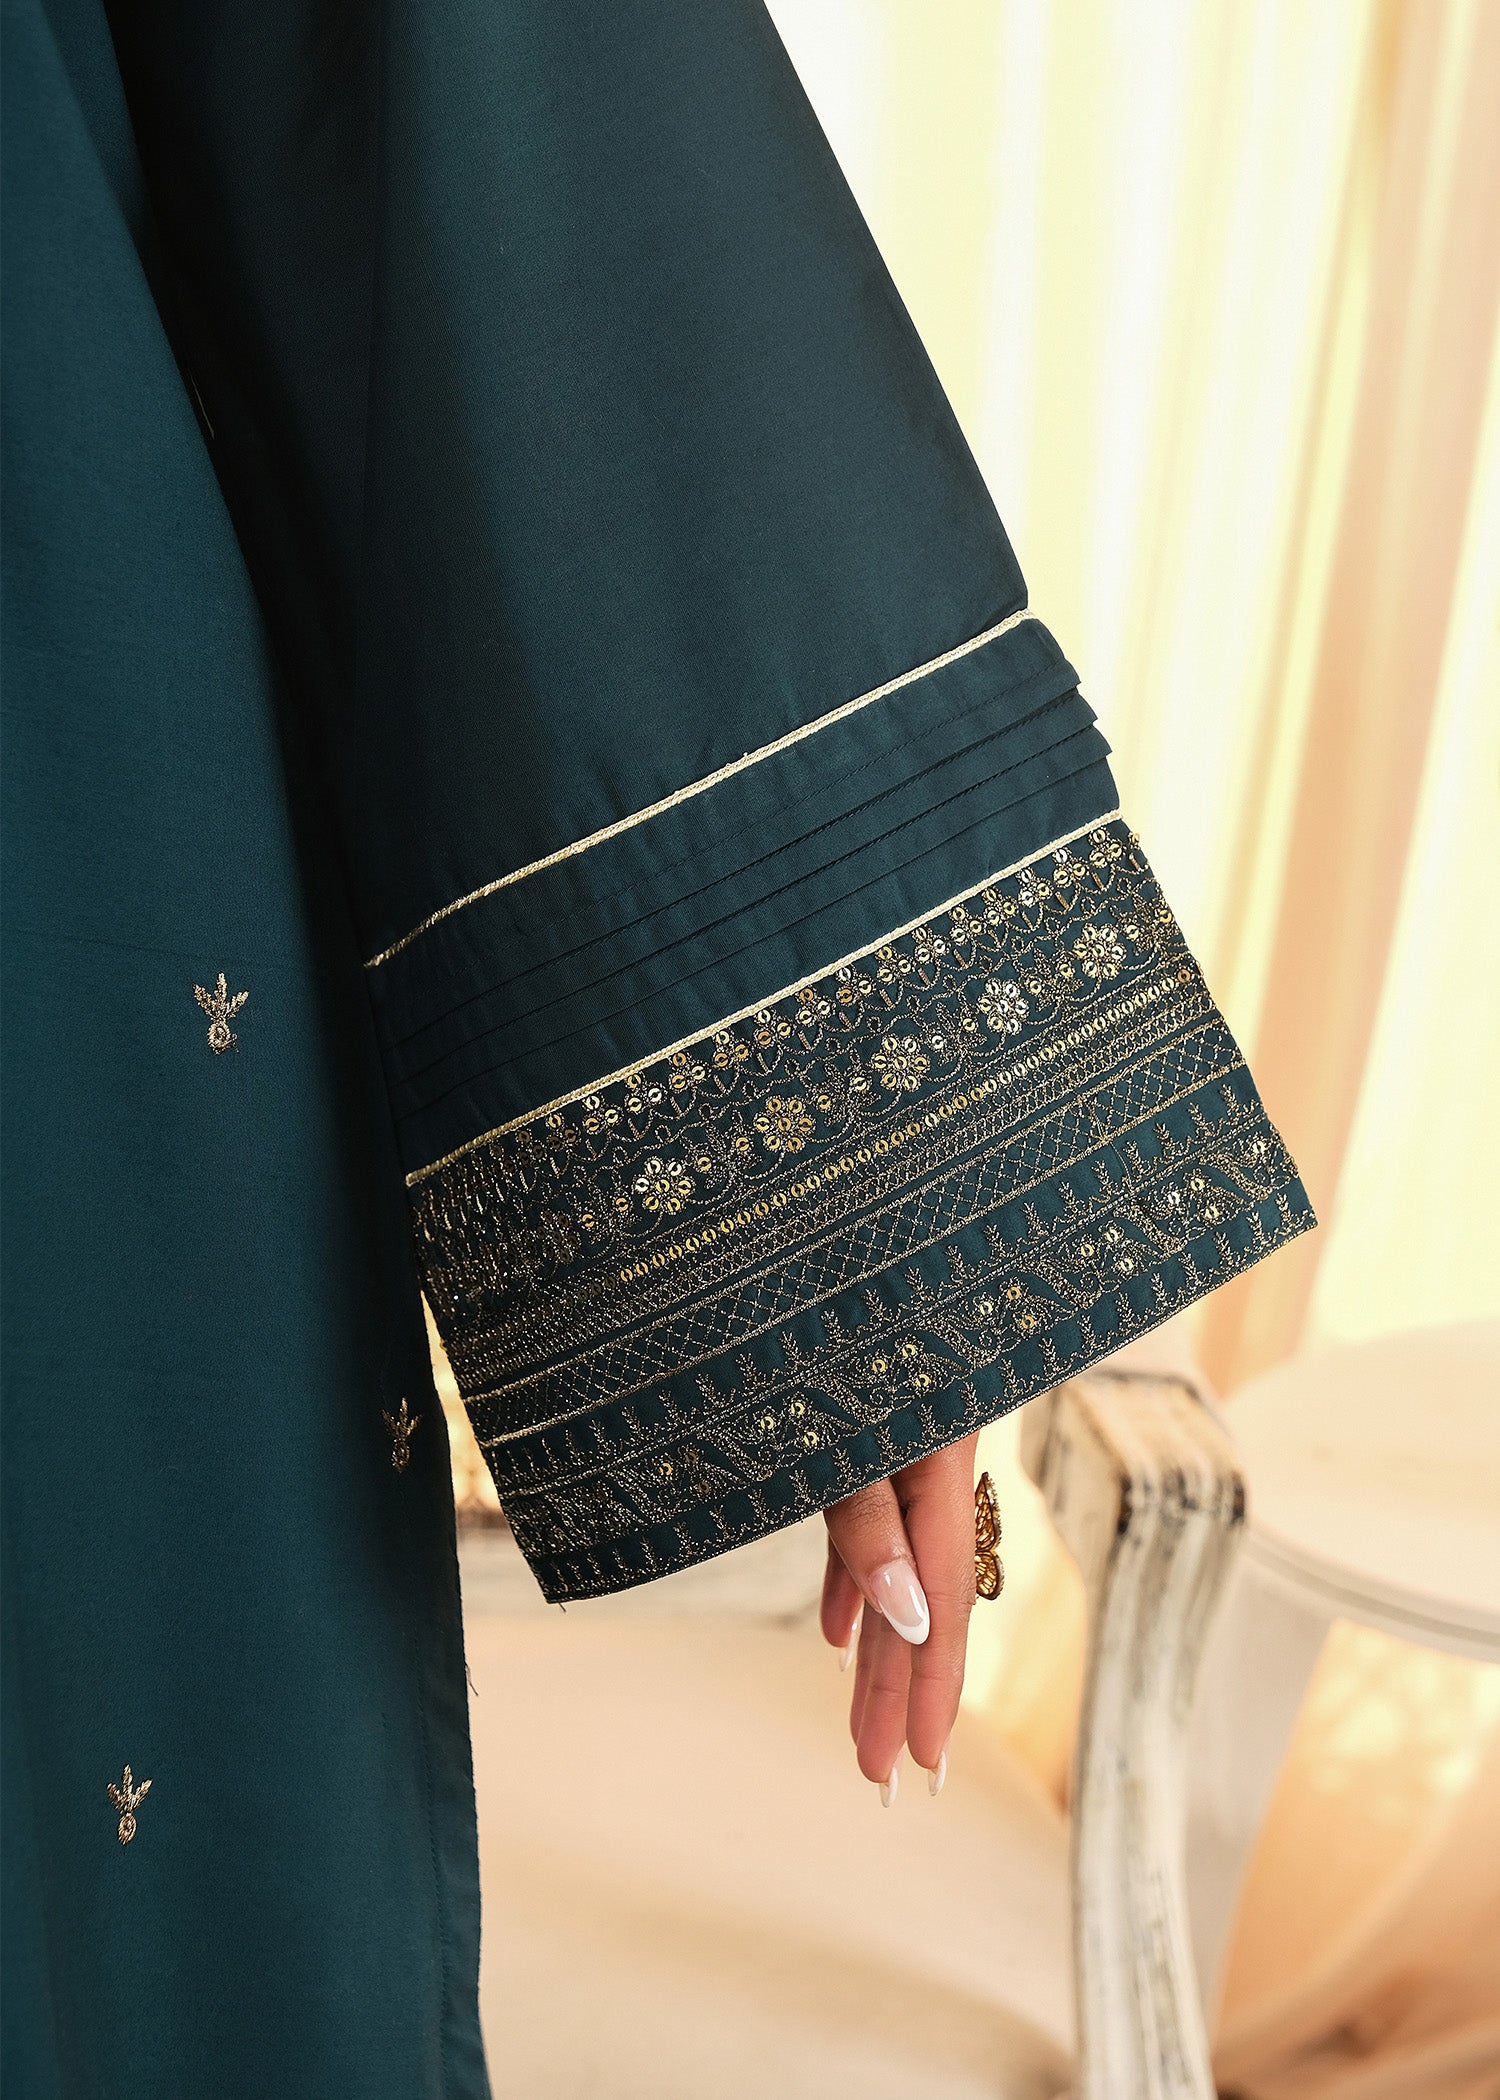 Teal Suit with Gold Embroidery